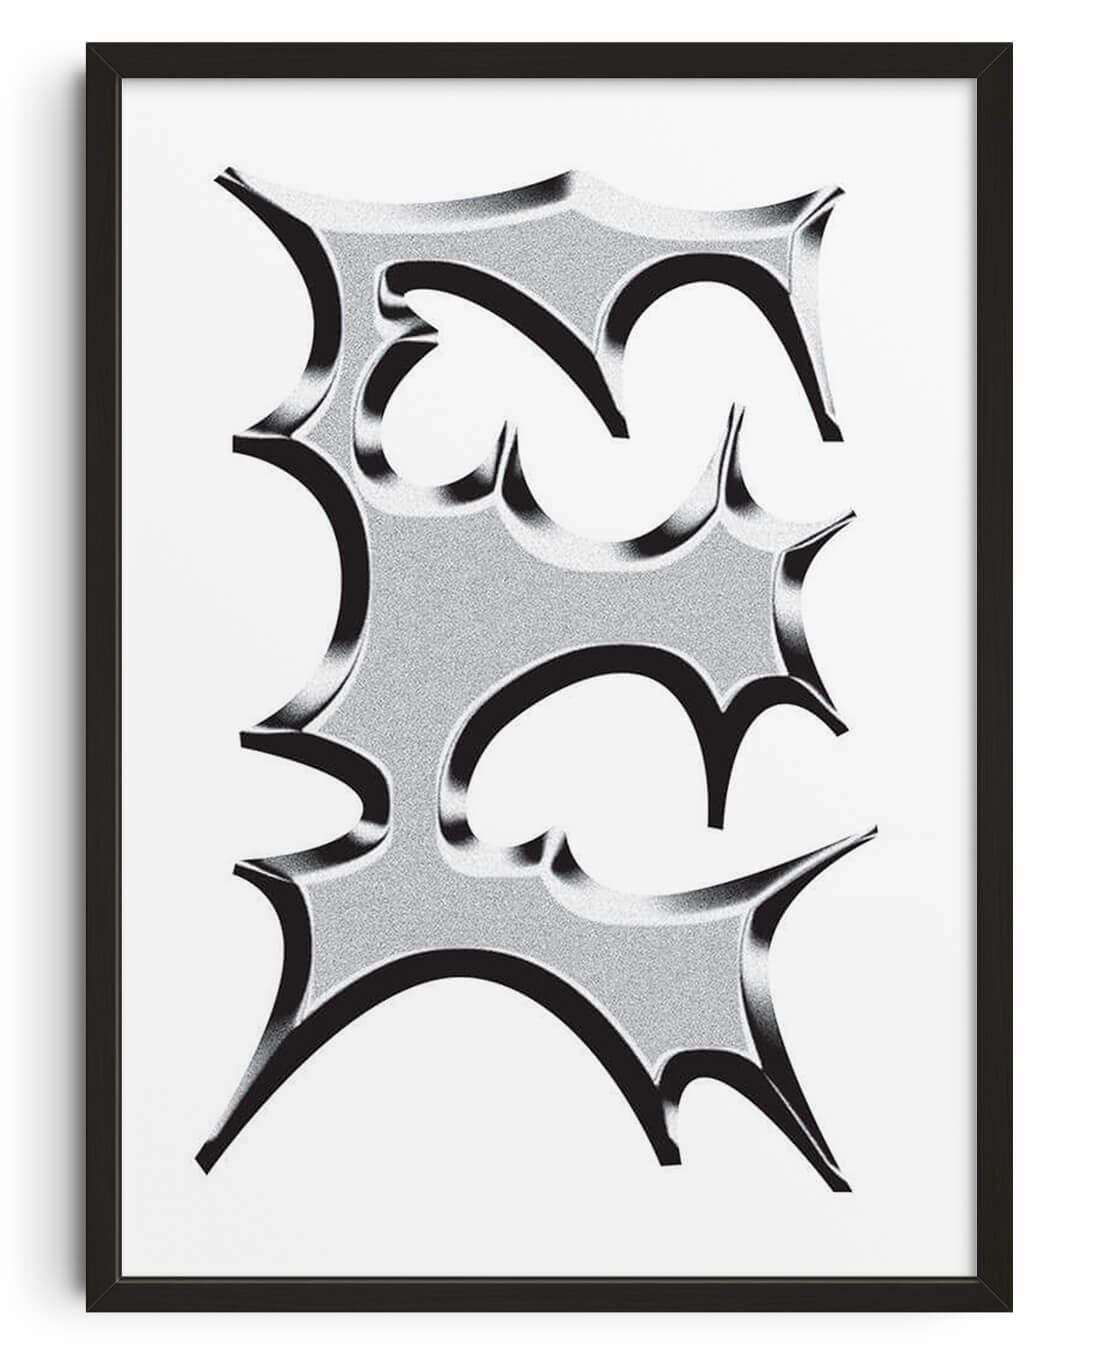 E by Pavel Ripley contemporary wall art print from DROOL